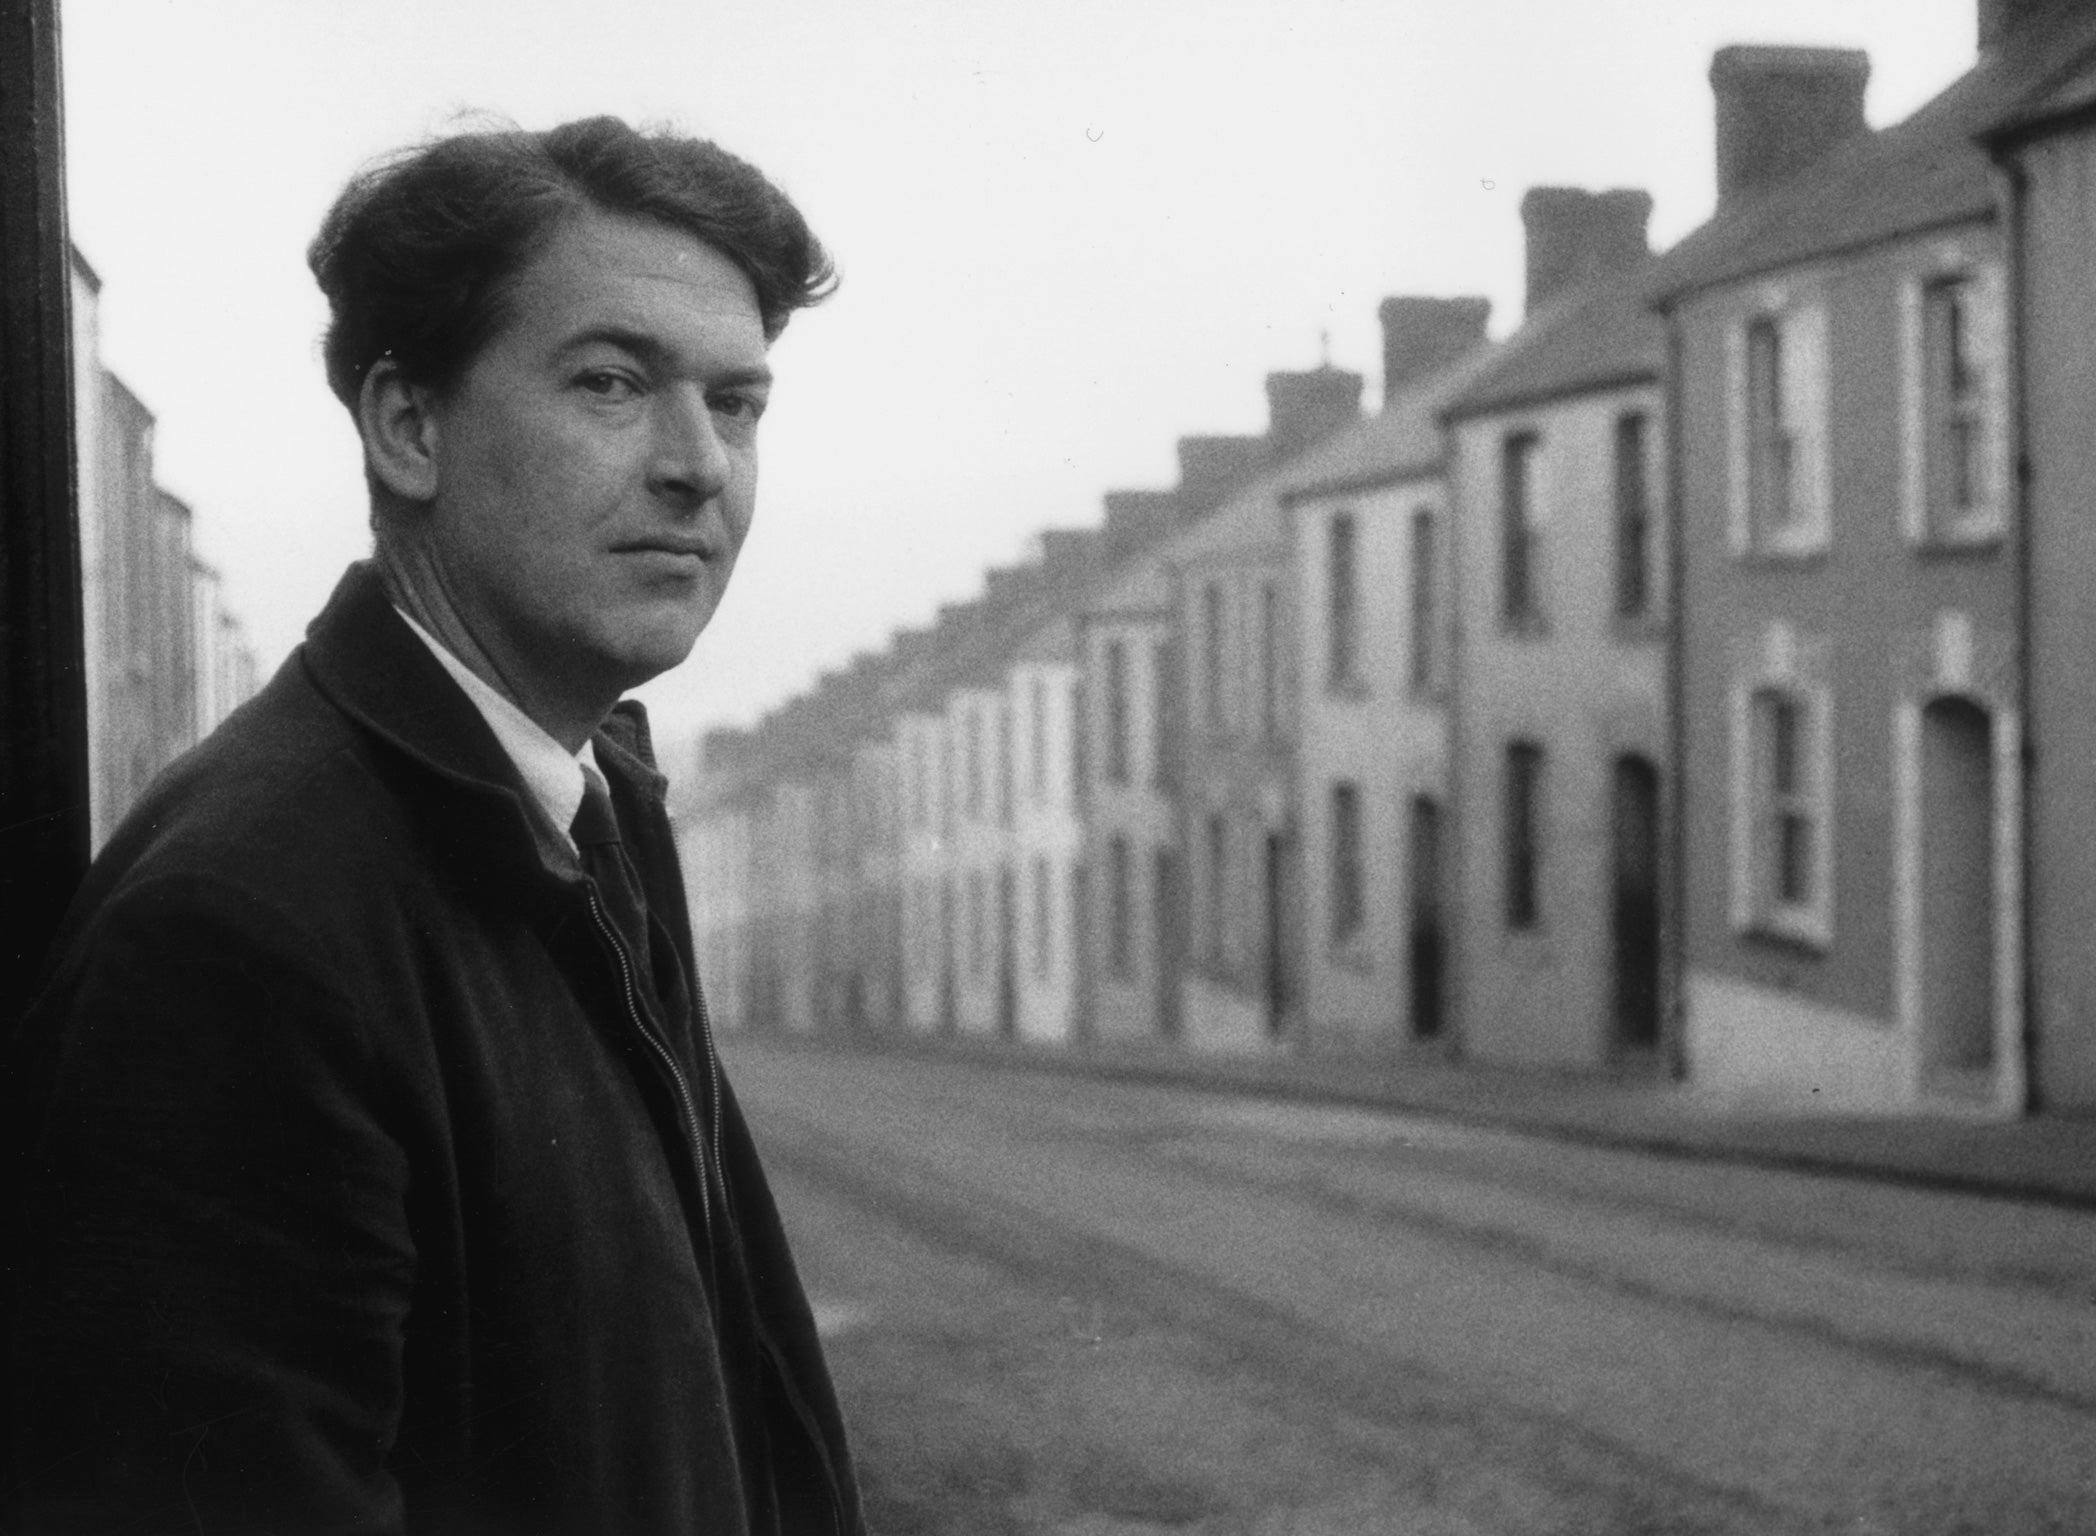 Kingsley Amis (pictured) and Philip Larkin were brought together by a liking for girls, books, and jazz